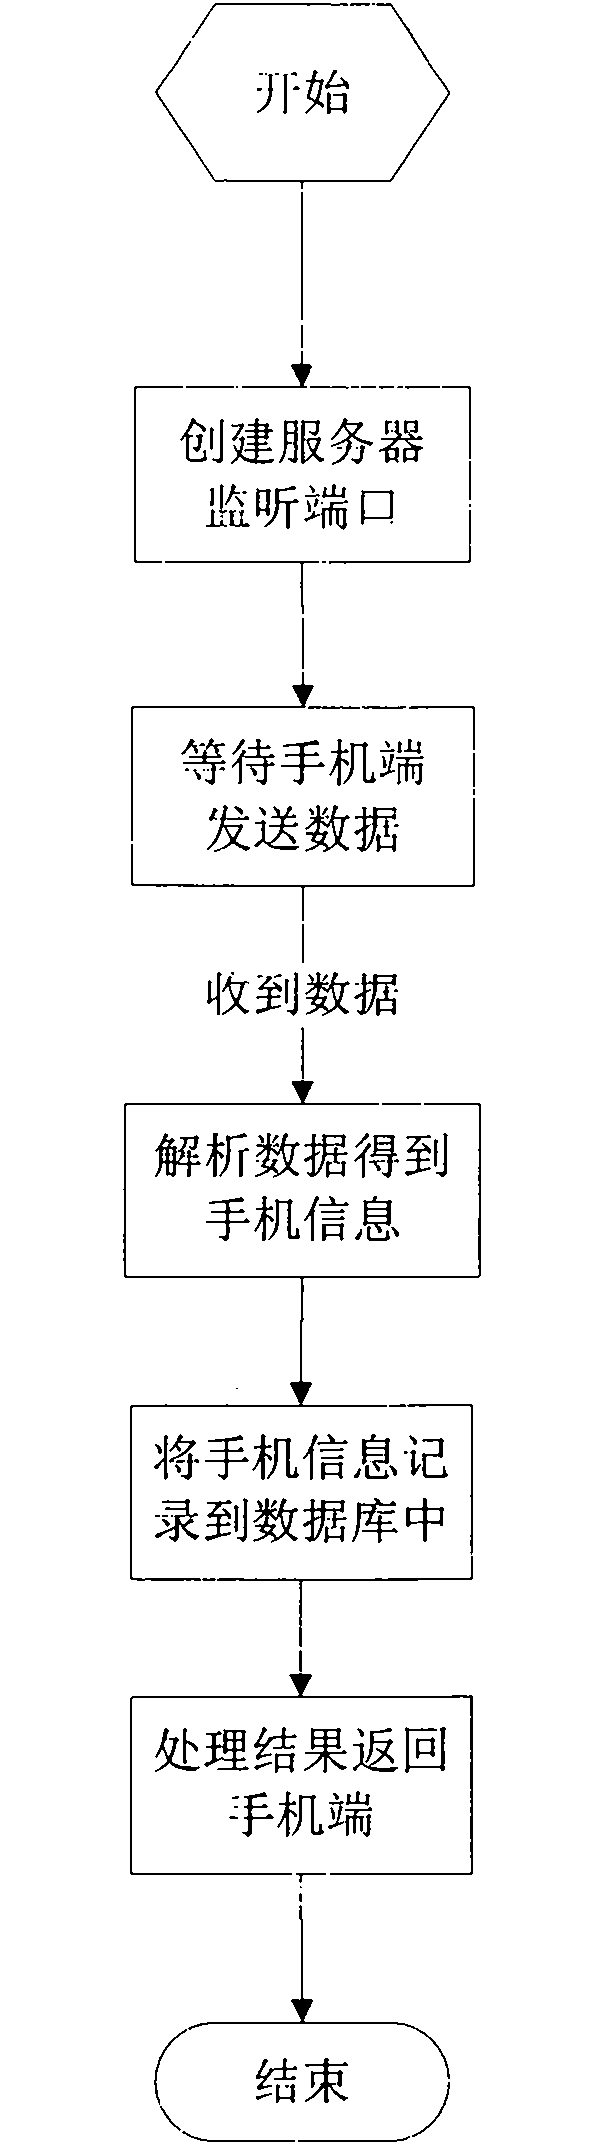 Anti-channel-conflict method based on position information